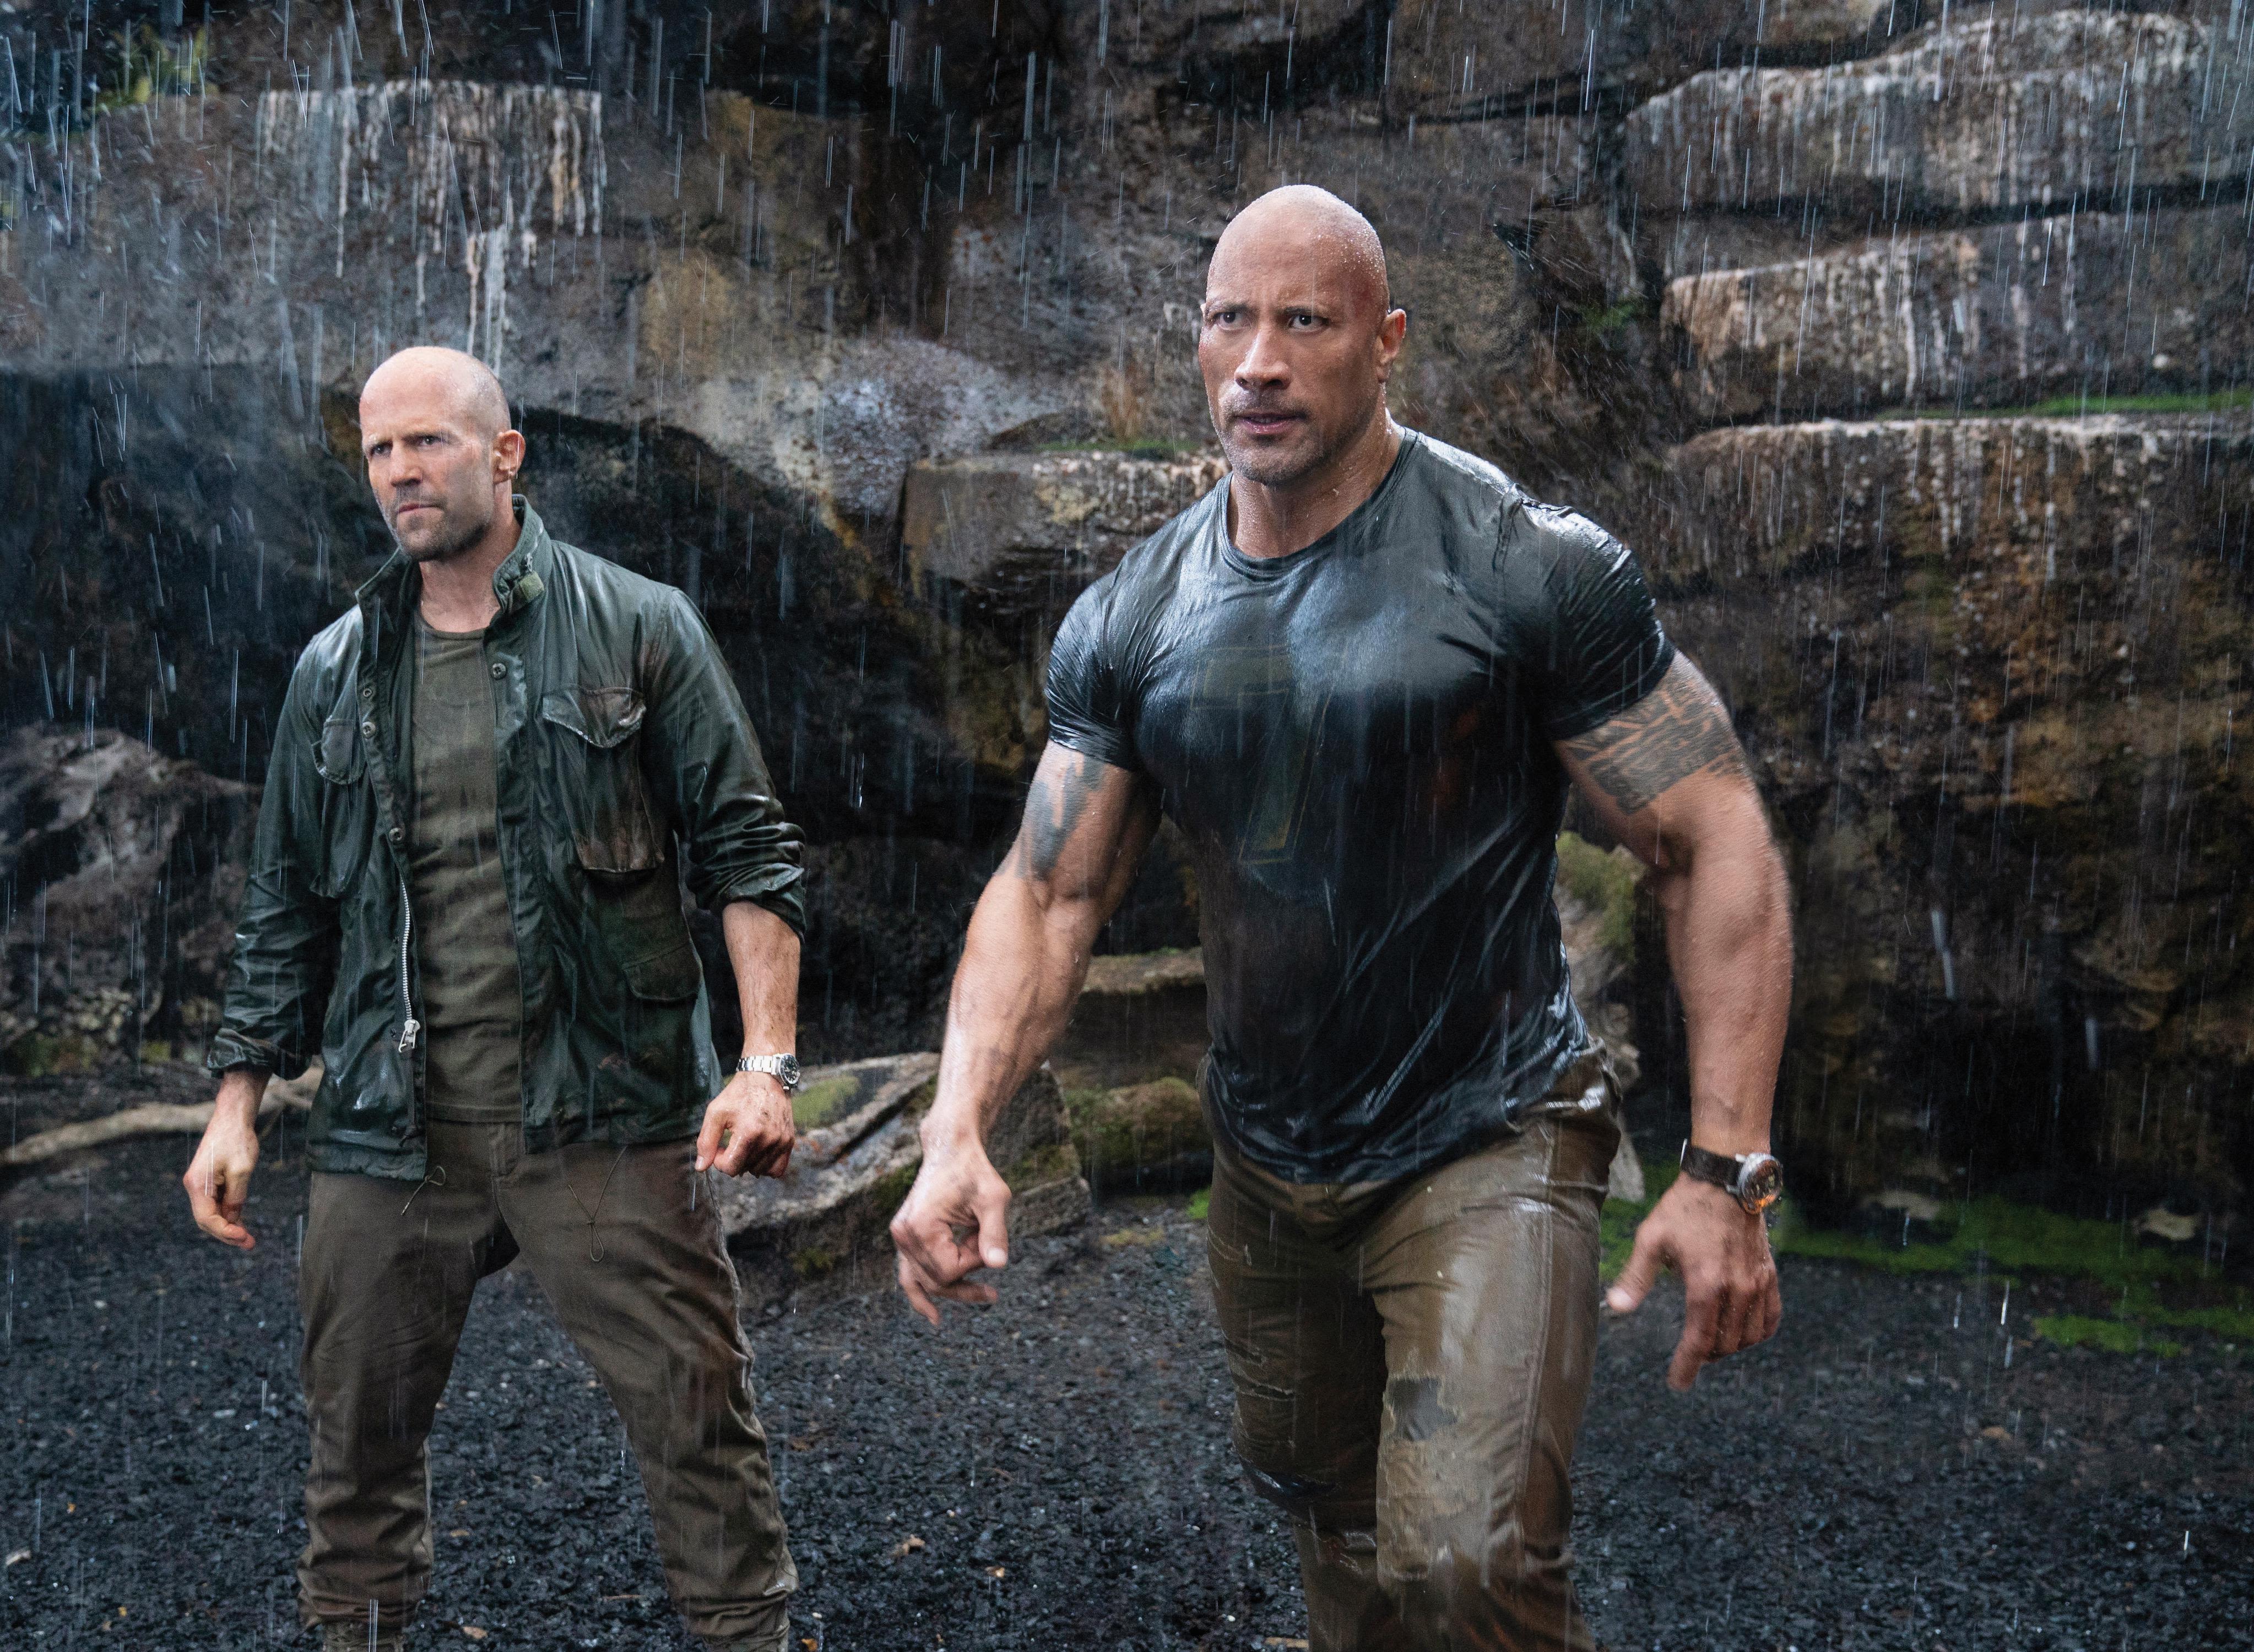 Fast and Furious' test drives spinoffs with 'Hobbs & Shaw